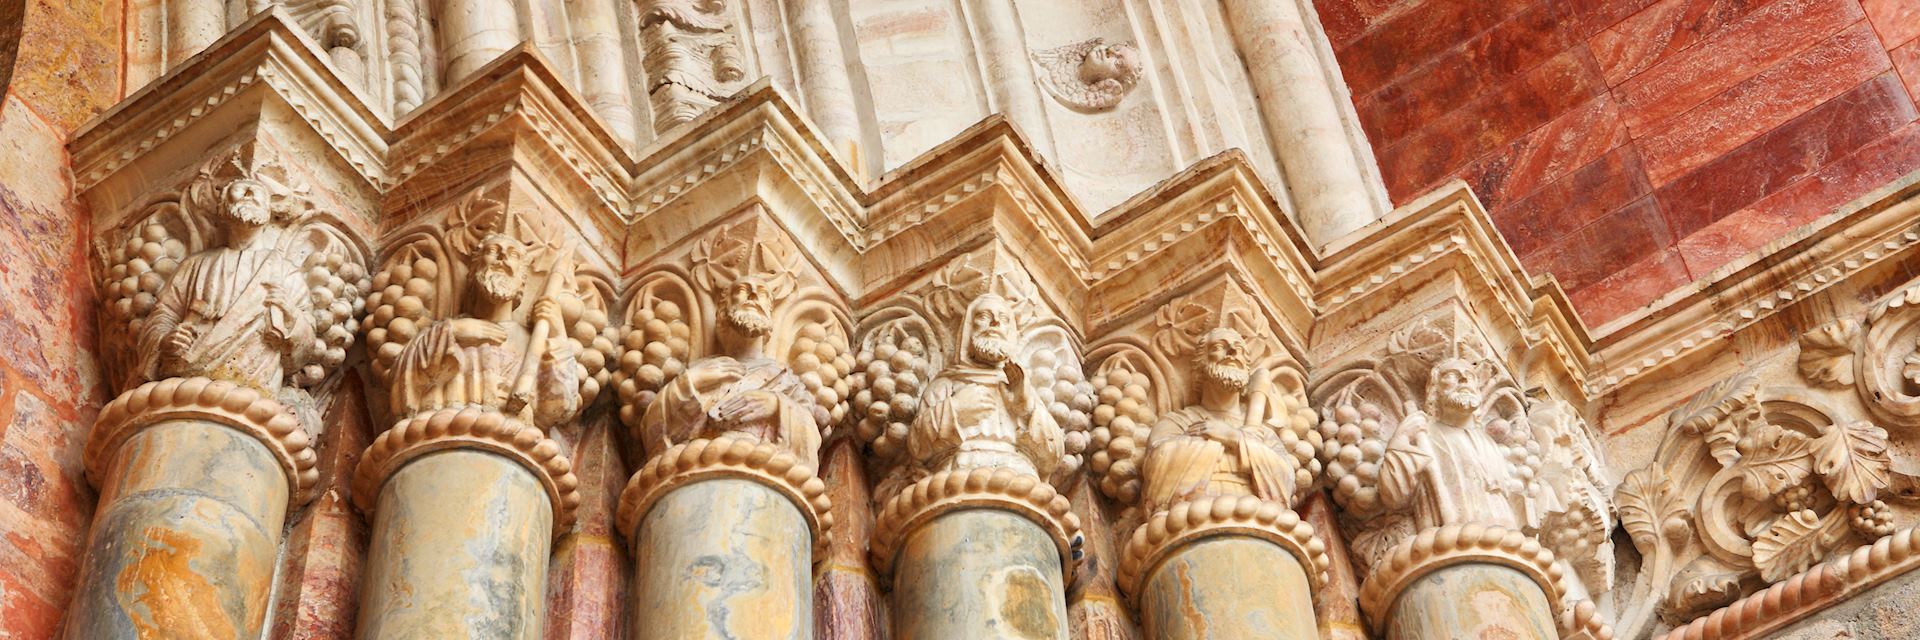 Cathedral architecture, Cuenca